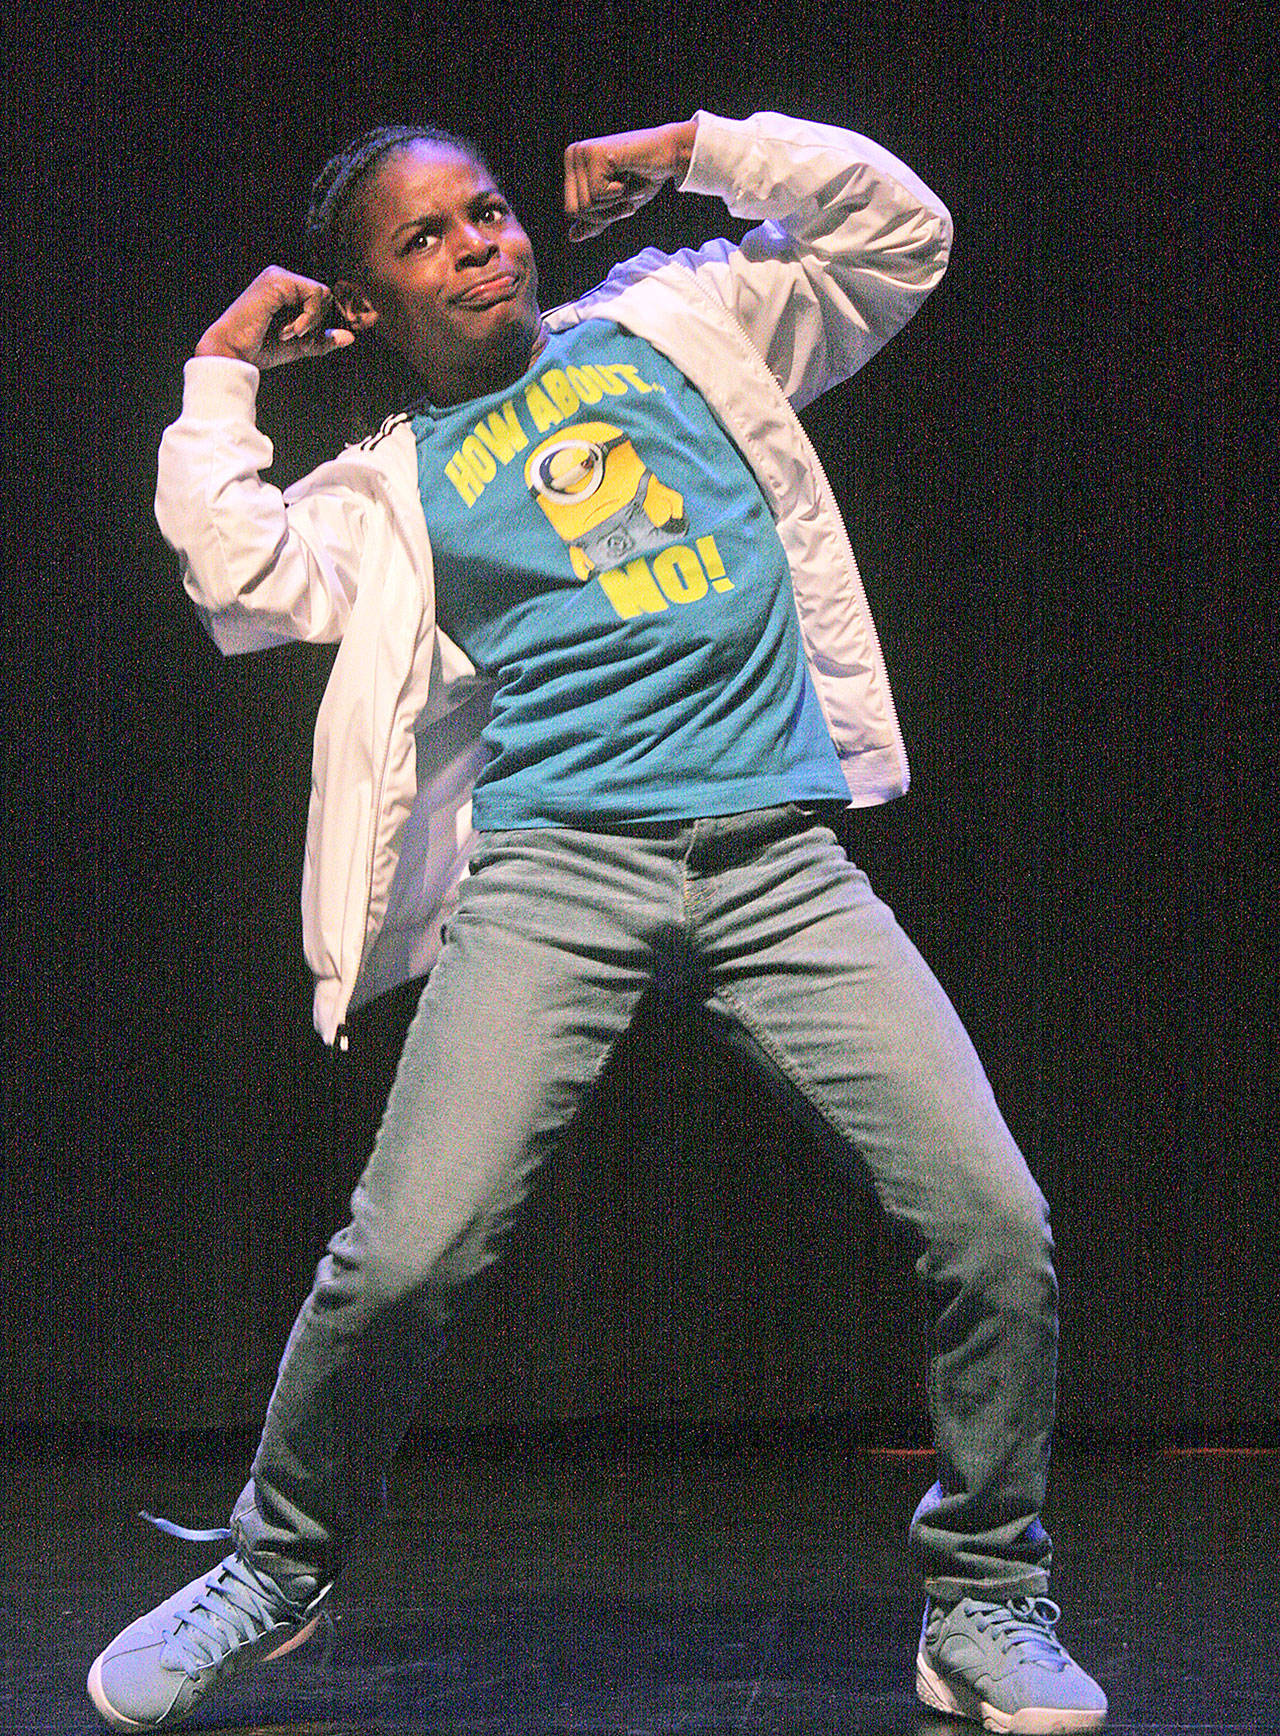 Dre’moni Watts, a 12-year-old sixth-grader at Panther Lake Elementary, took the youth cateogry competition with his quick-stepping dance. COURTESY PHOTO, Width Photography